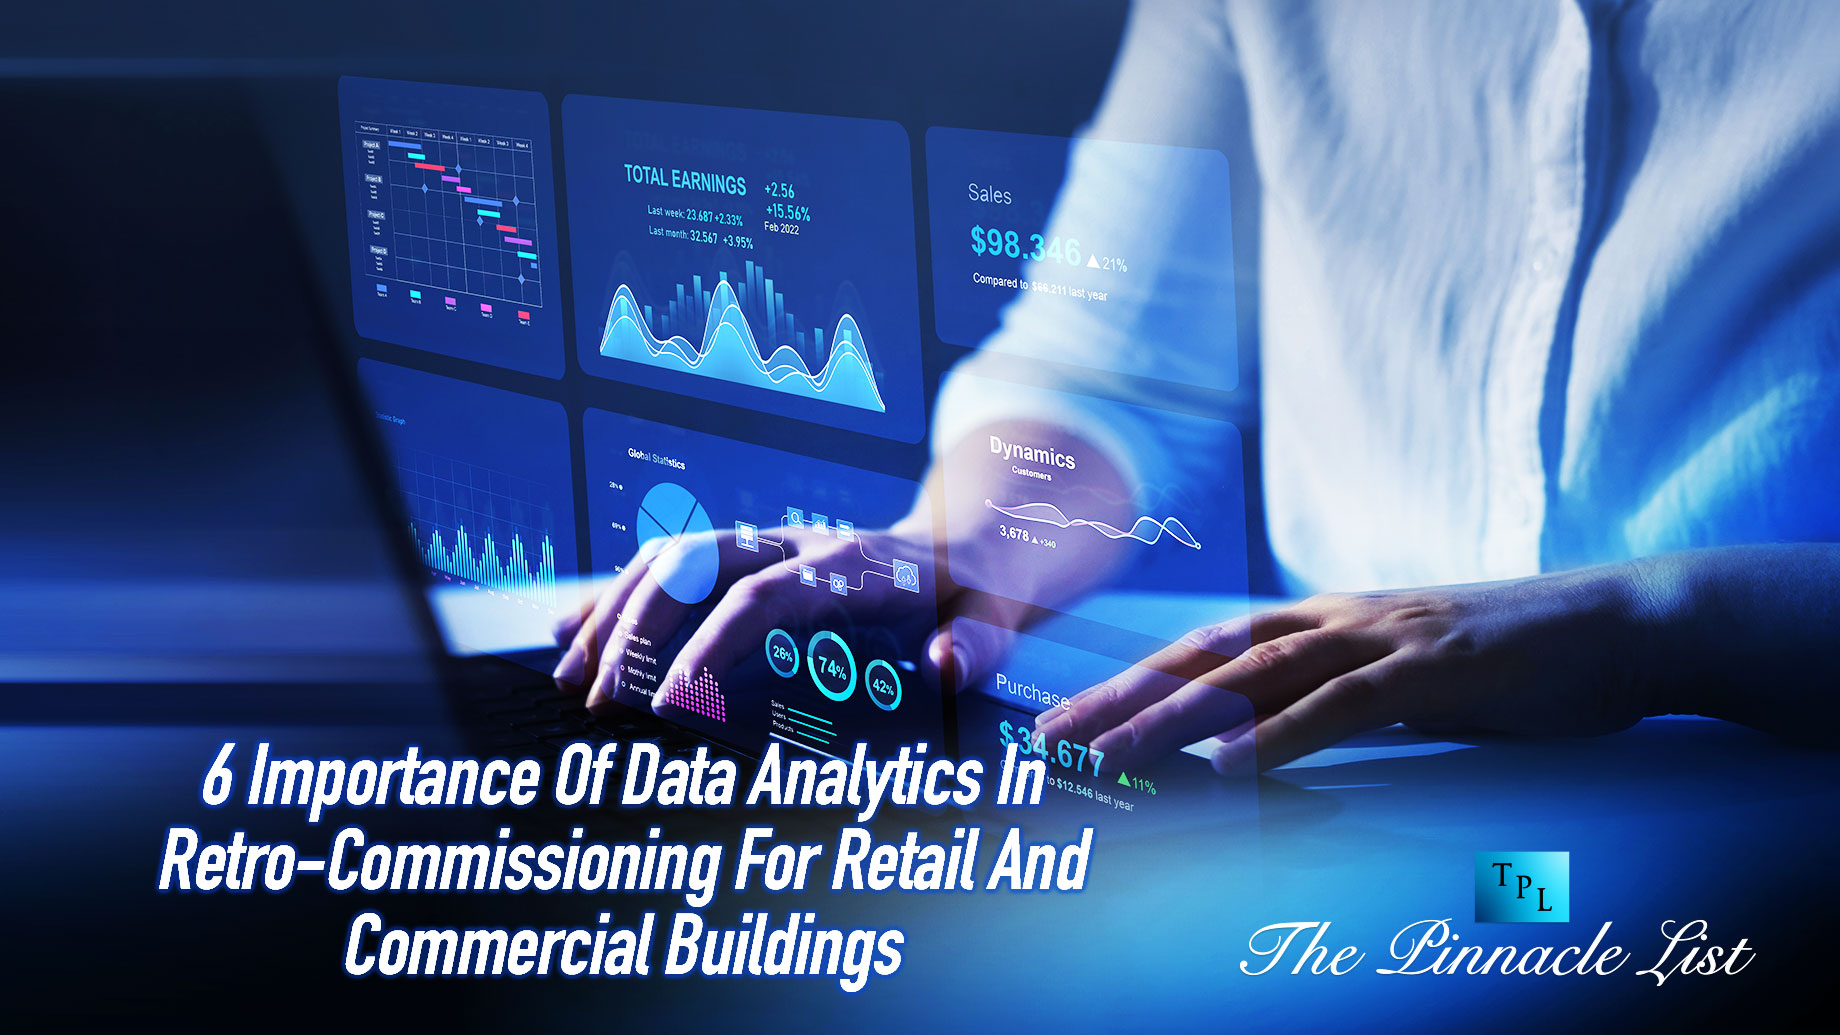 6 Importance Of Data Analytics In Retro-Commissioning For Retail And Commercial Buildings